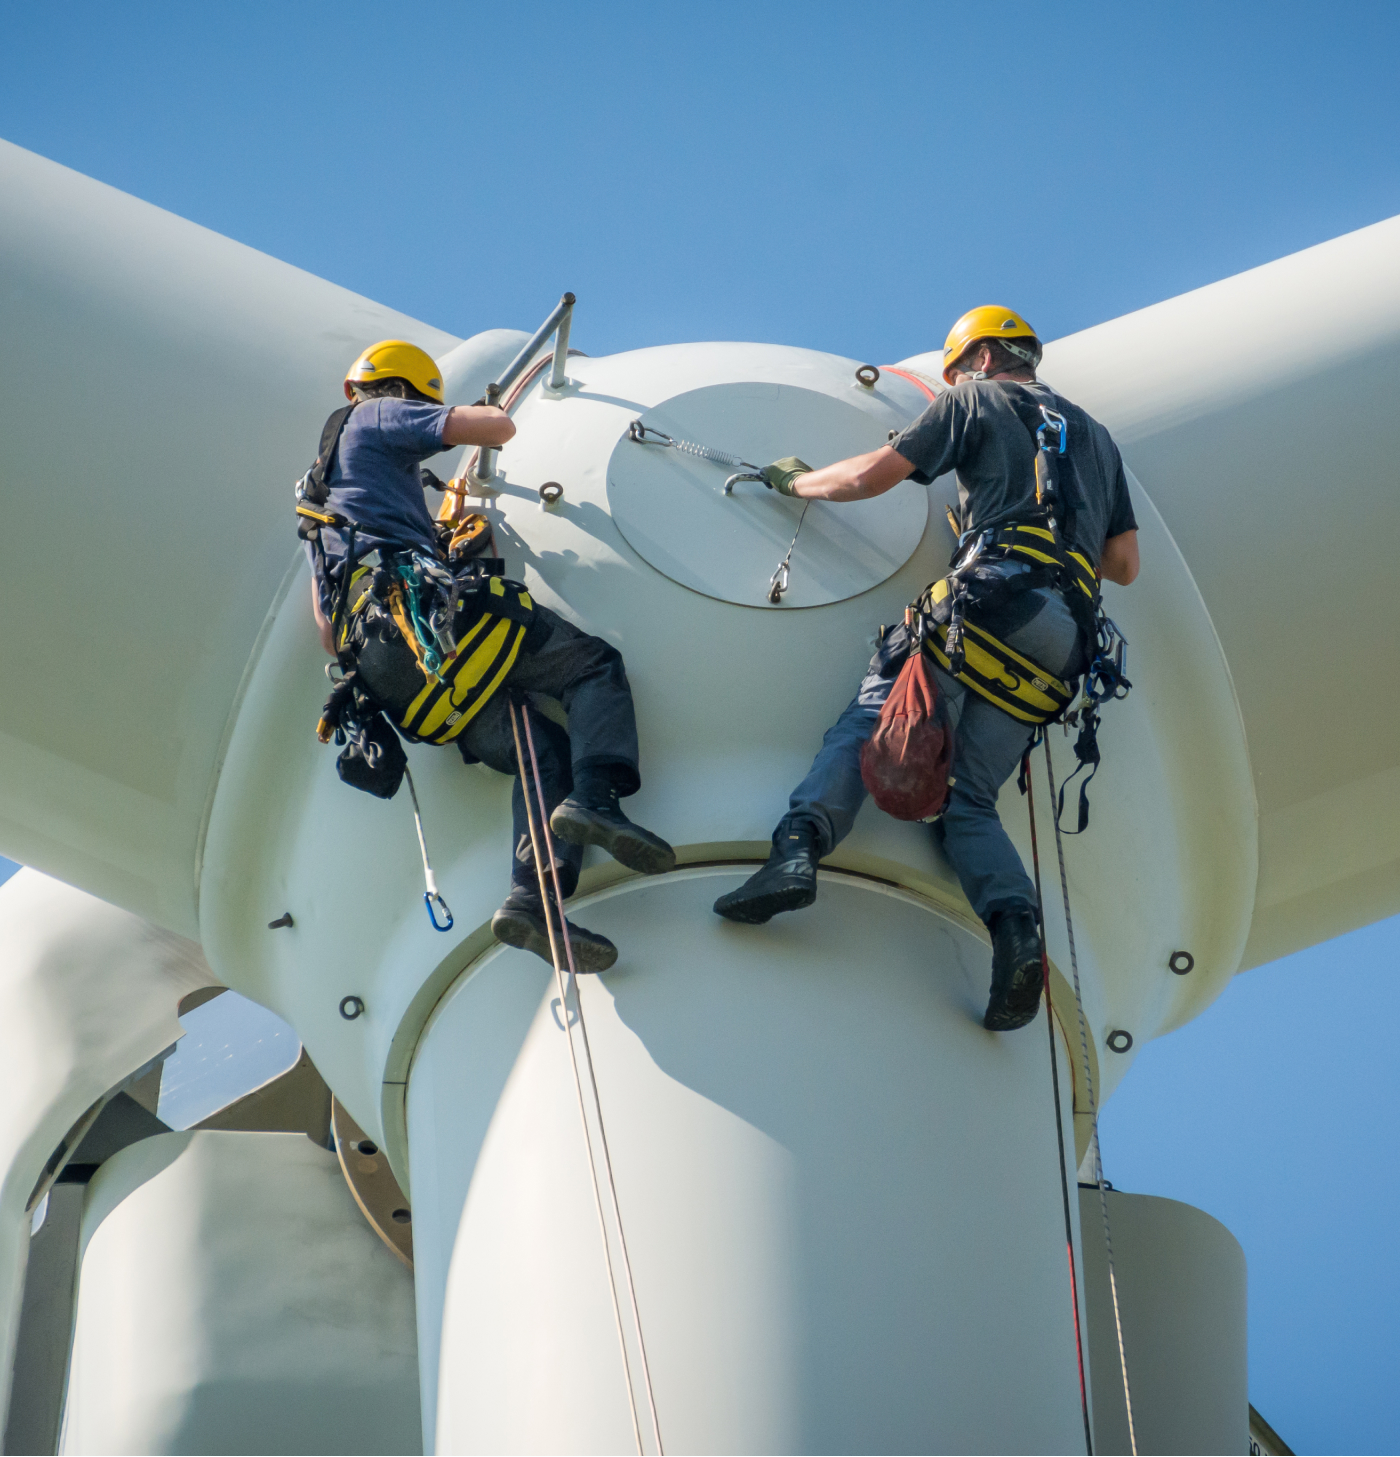 Two possible contract workers, fixing an issue on a windfarm